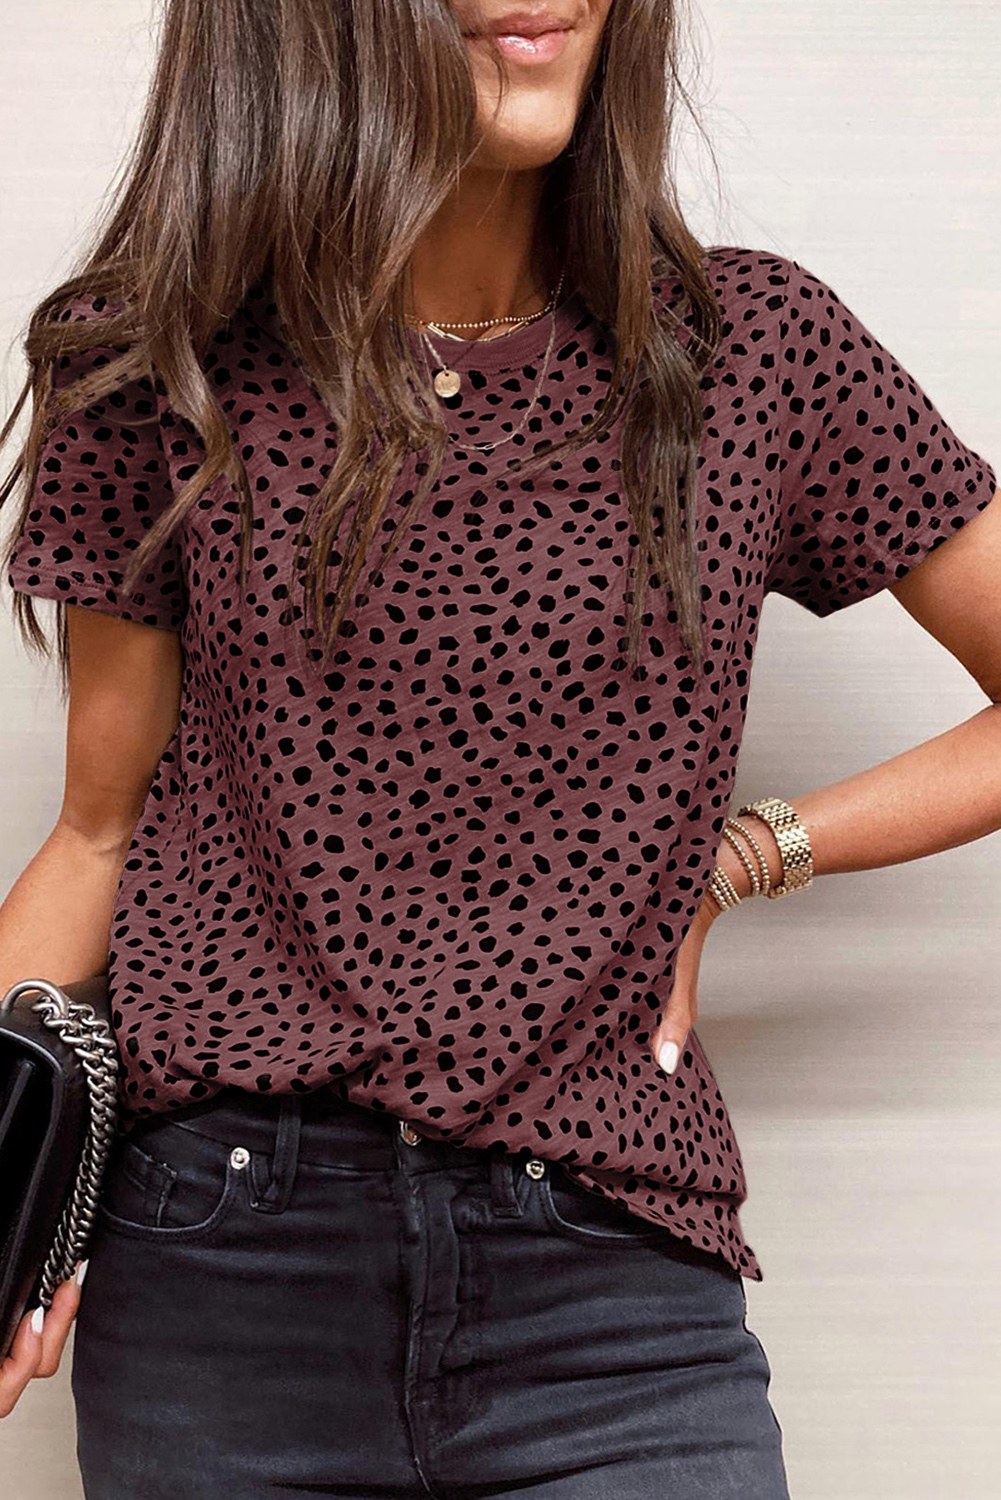 Shewin Wholesale Clothes Distributor Red Cheetah Print Casual Short Sleeve Crew Neck T SHIRT